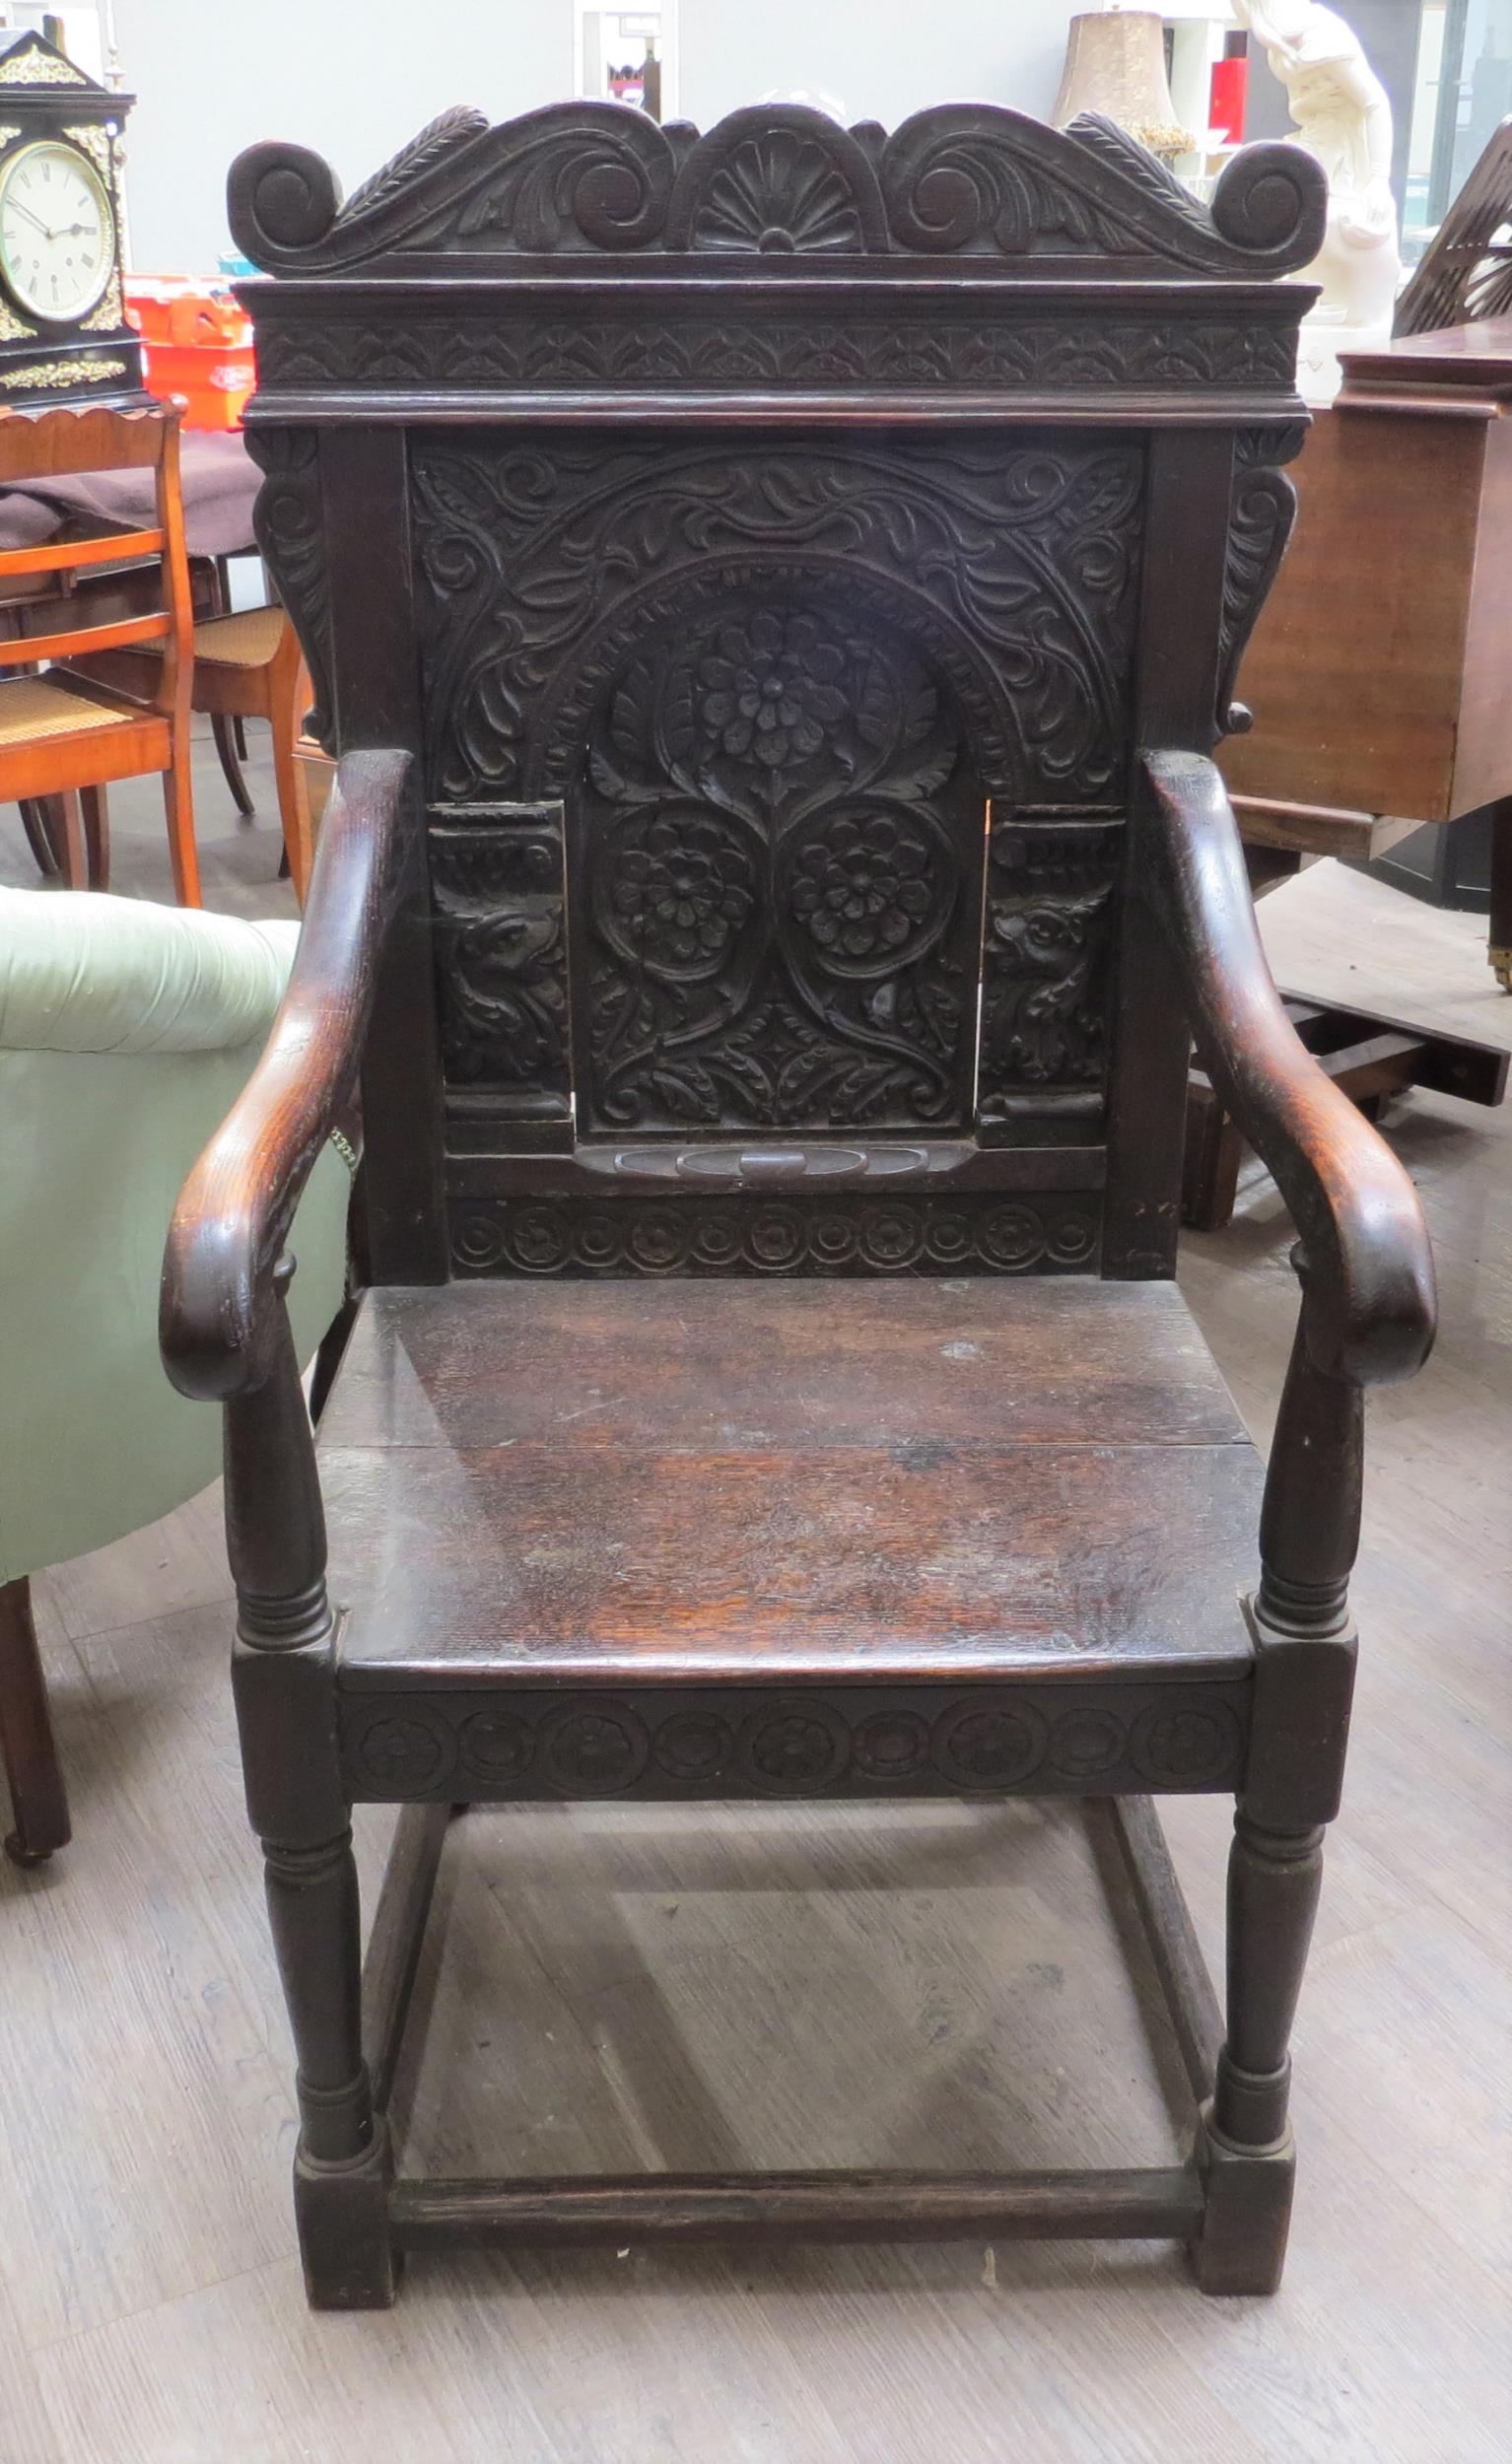 A 17th Century and later Wainscot chair with scroll top and dragon detail, vine, leaf and flower